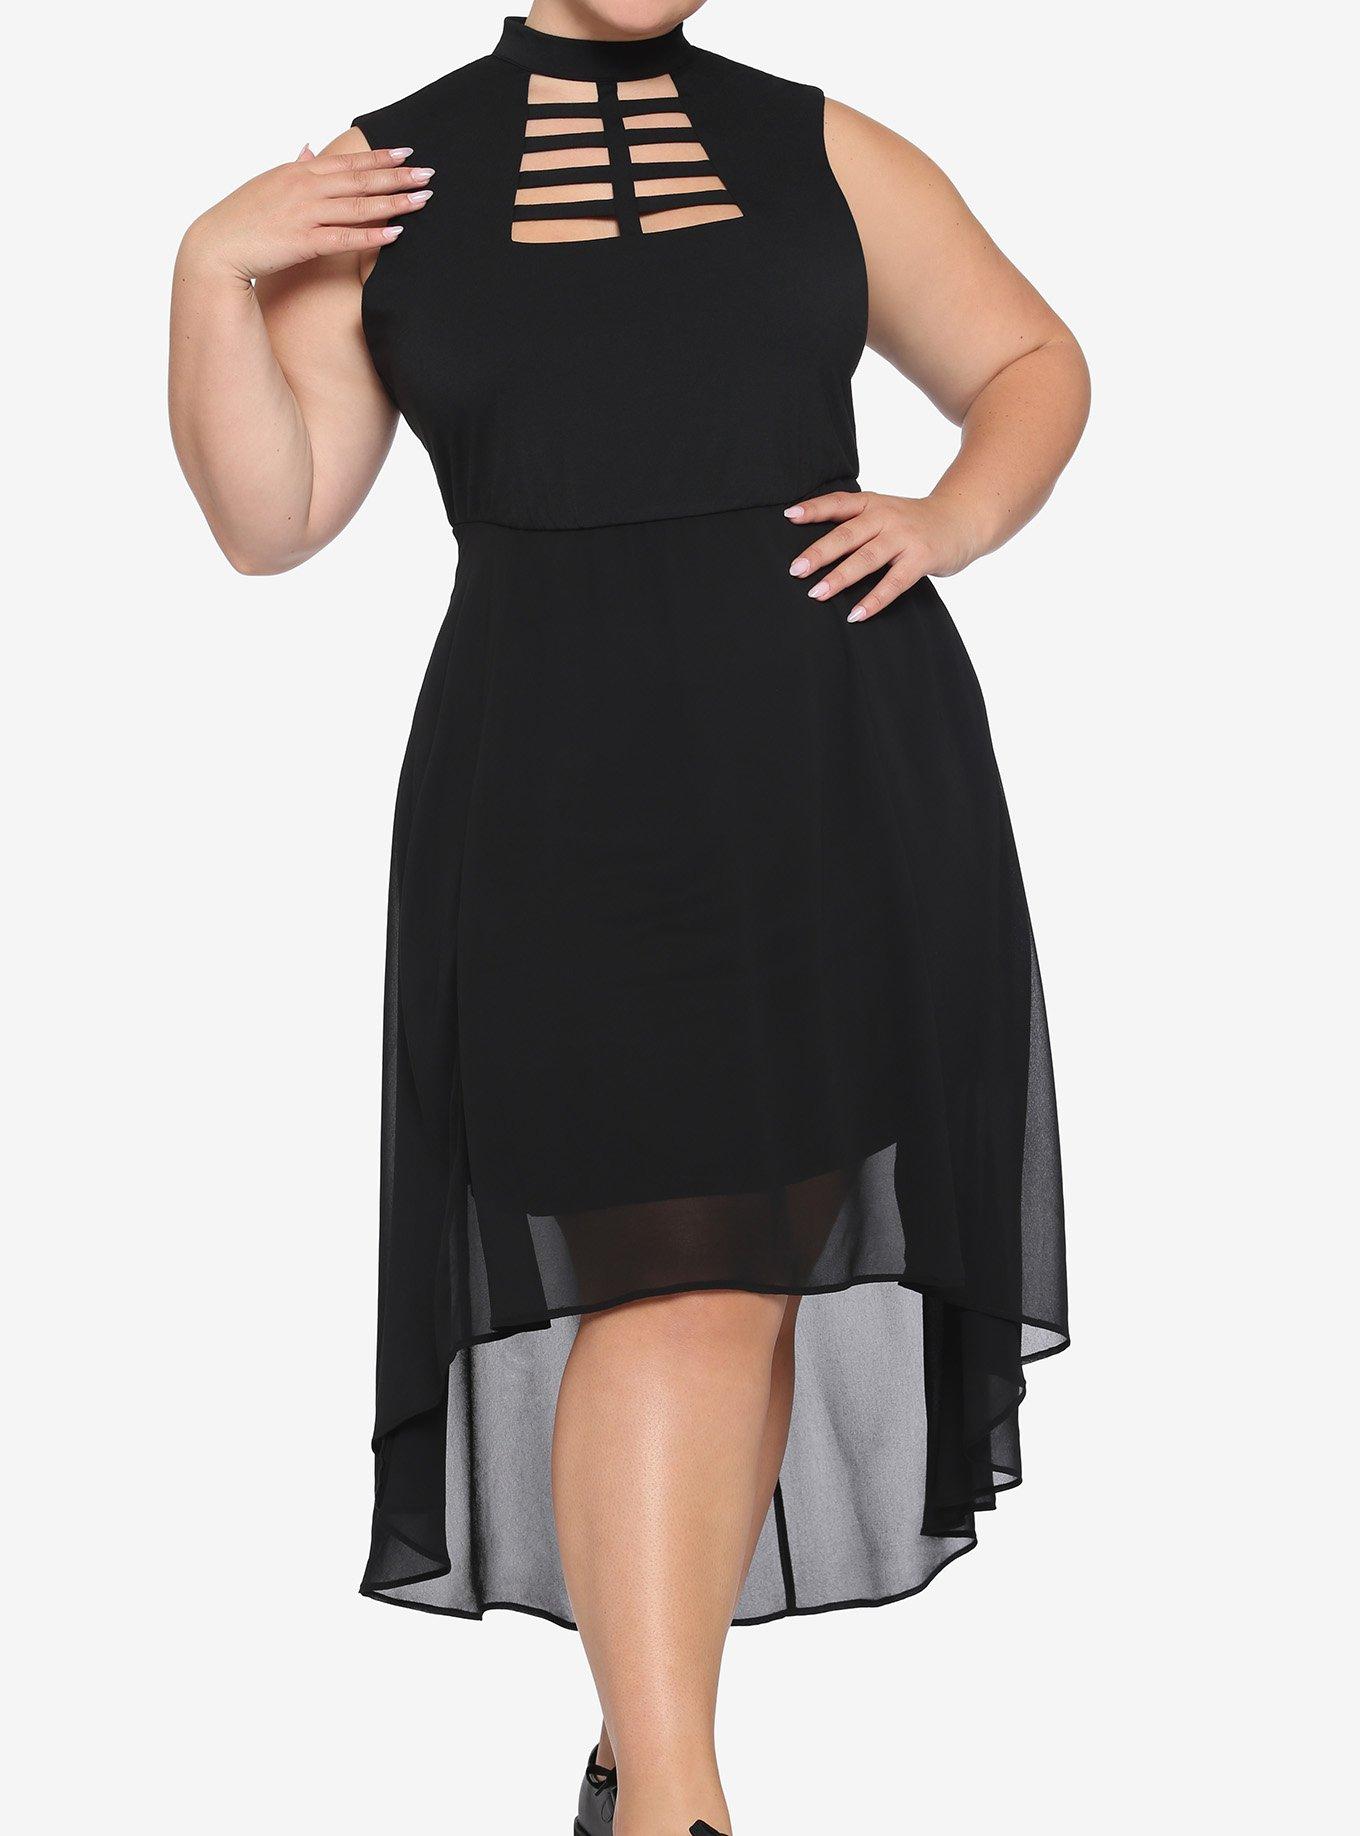 Black Caged Front Hi-Low Dress Plus Size | Hot Topic